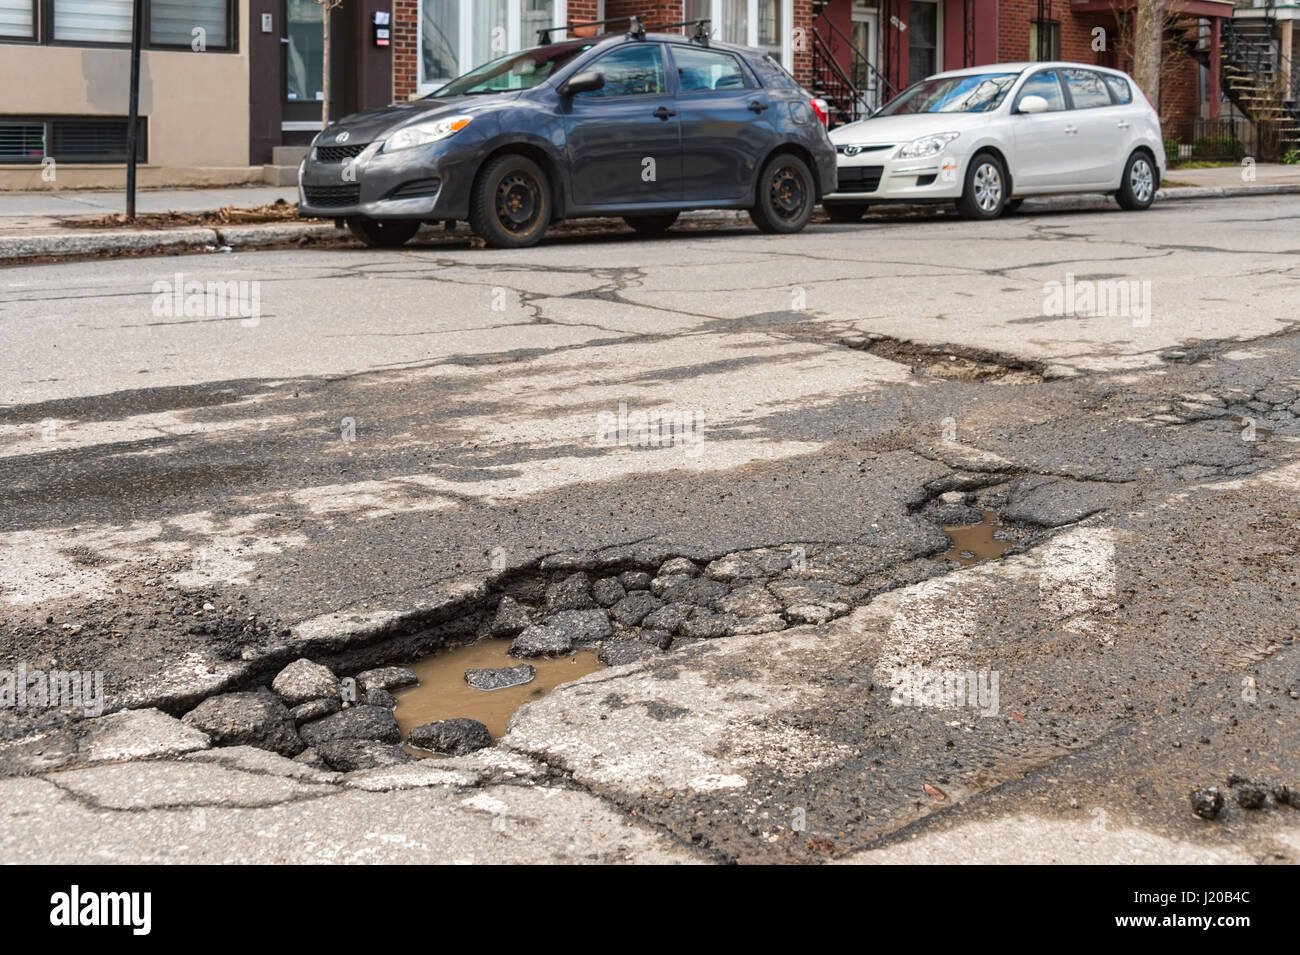 Montreal, Canada - 21 April 2017: Large unrepaired pothole on Gilford street Stock Photo